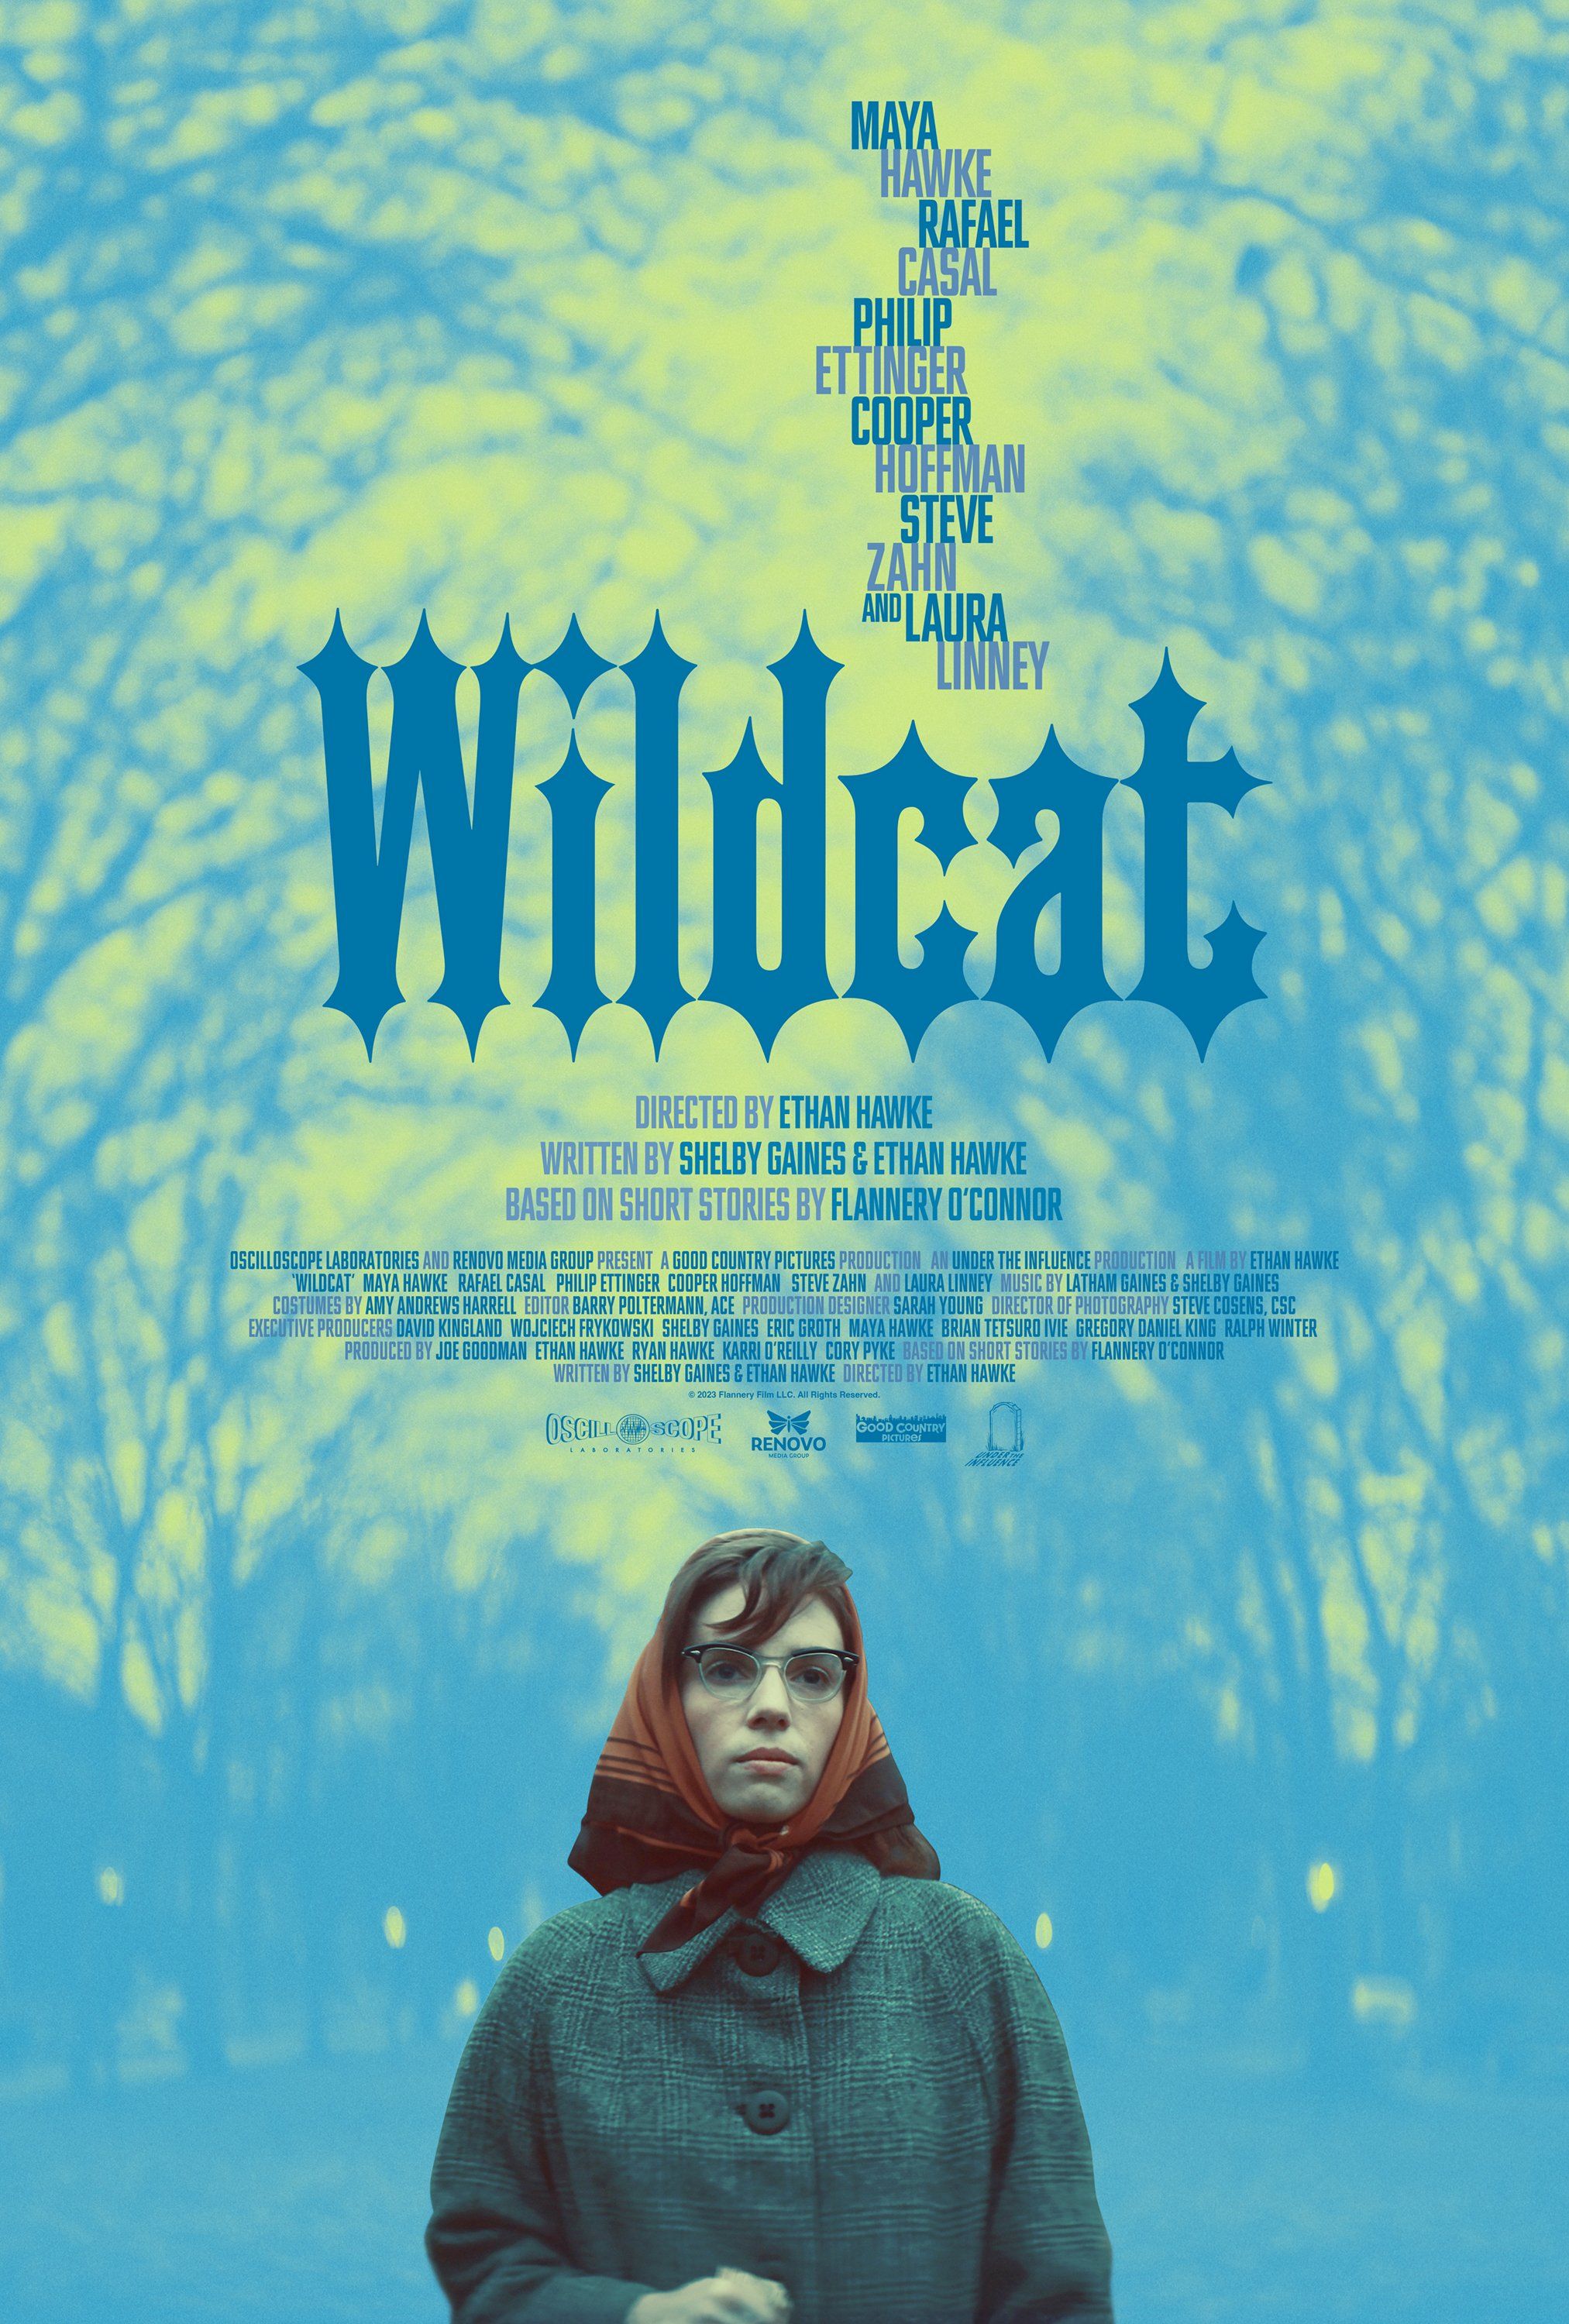 A woman wears a heavy coat and a scarf on her head in a poster for the Ethan Hawke-directed film Wildcat